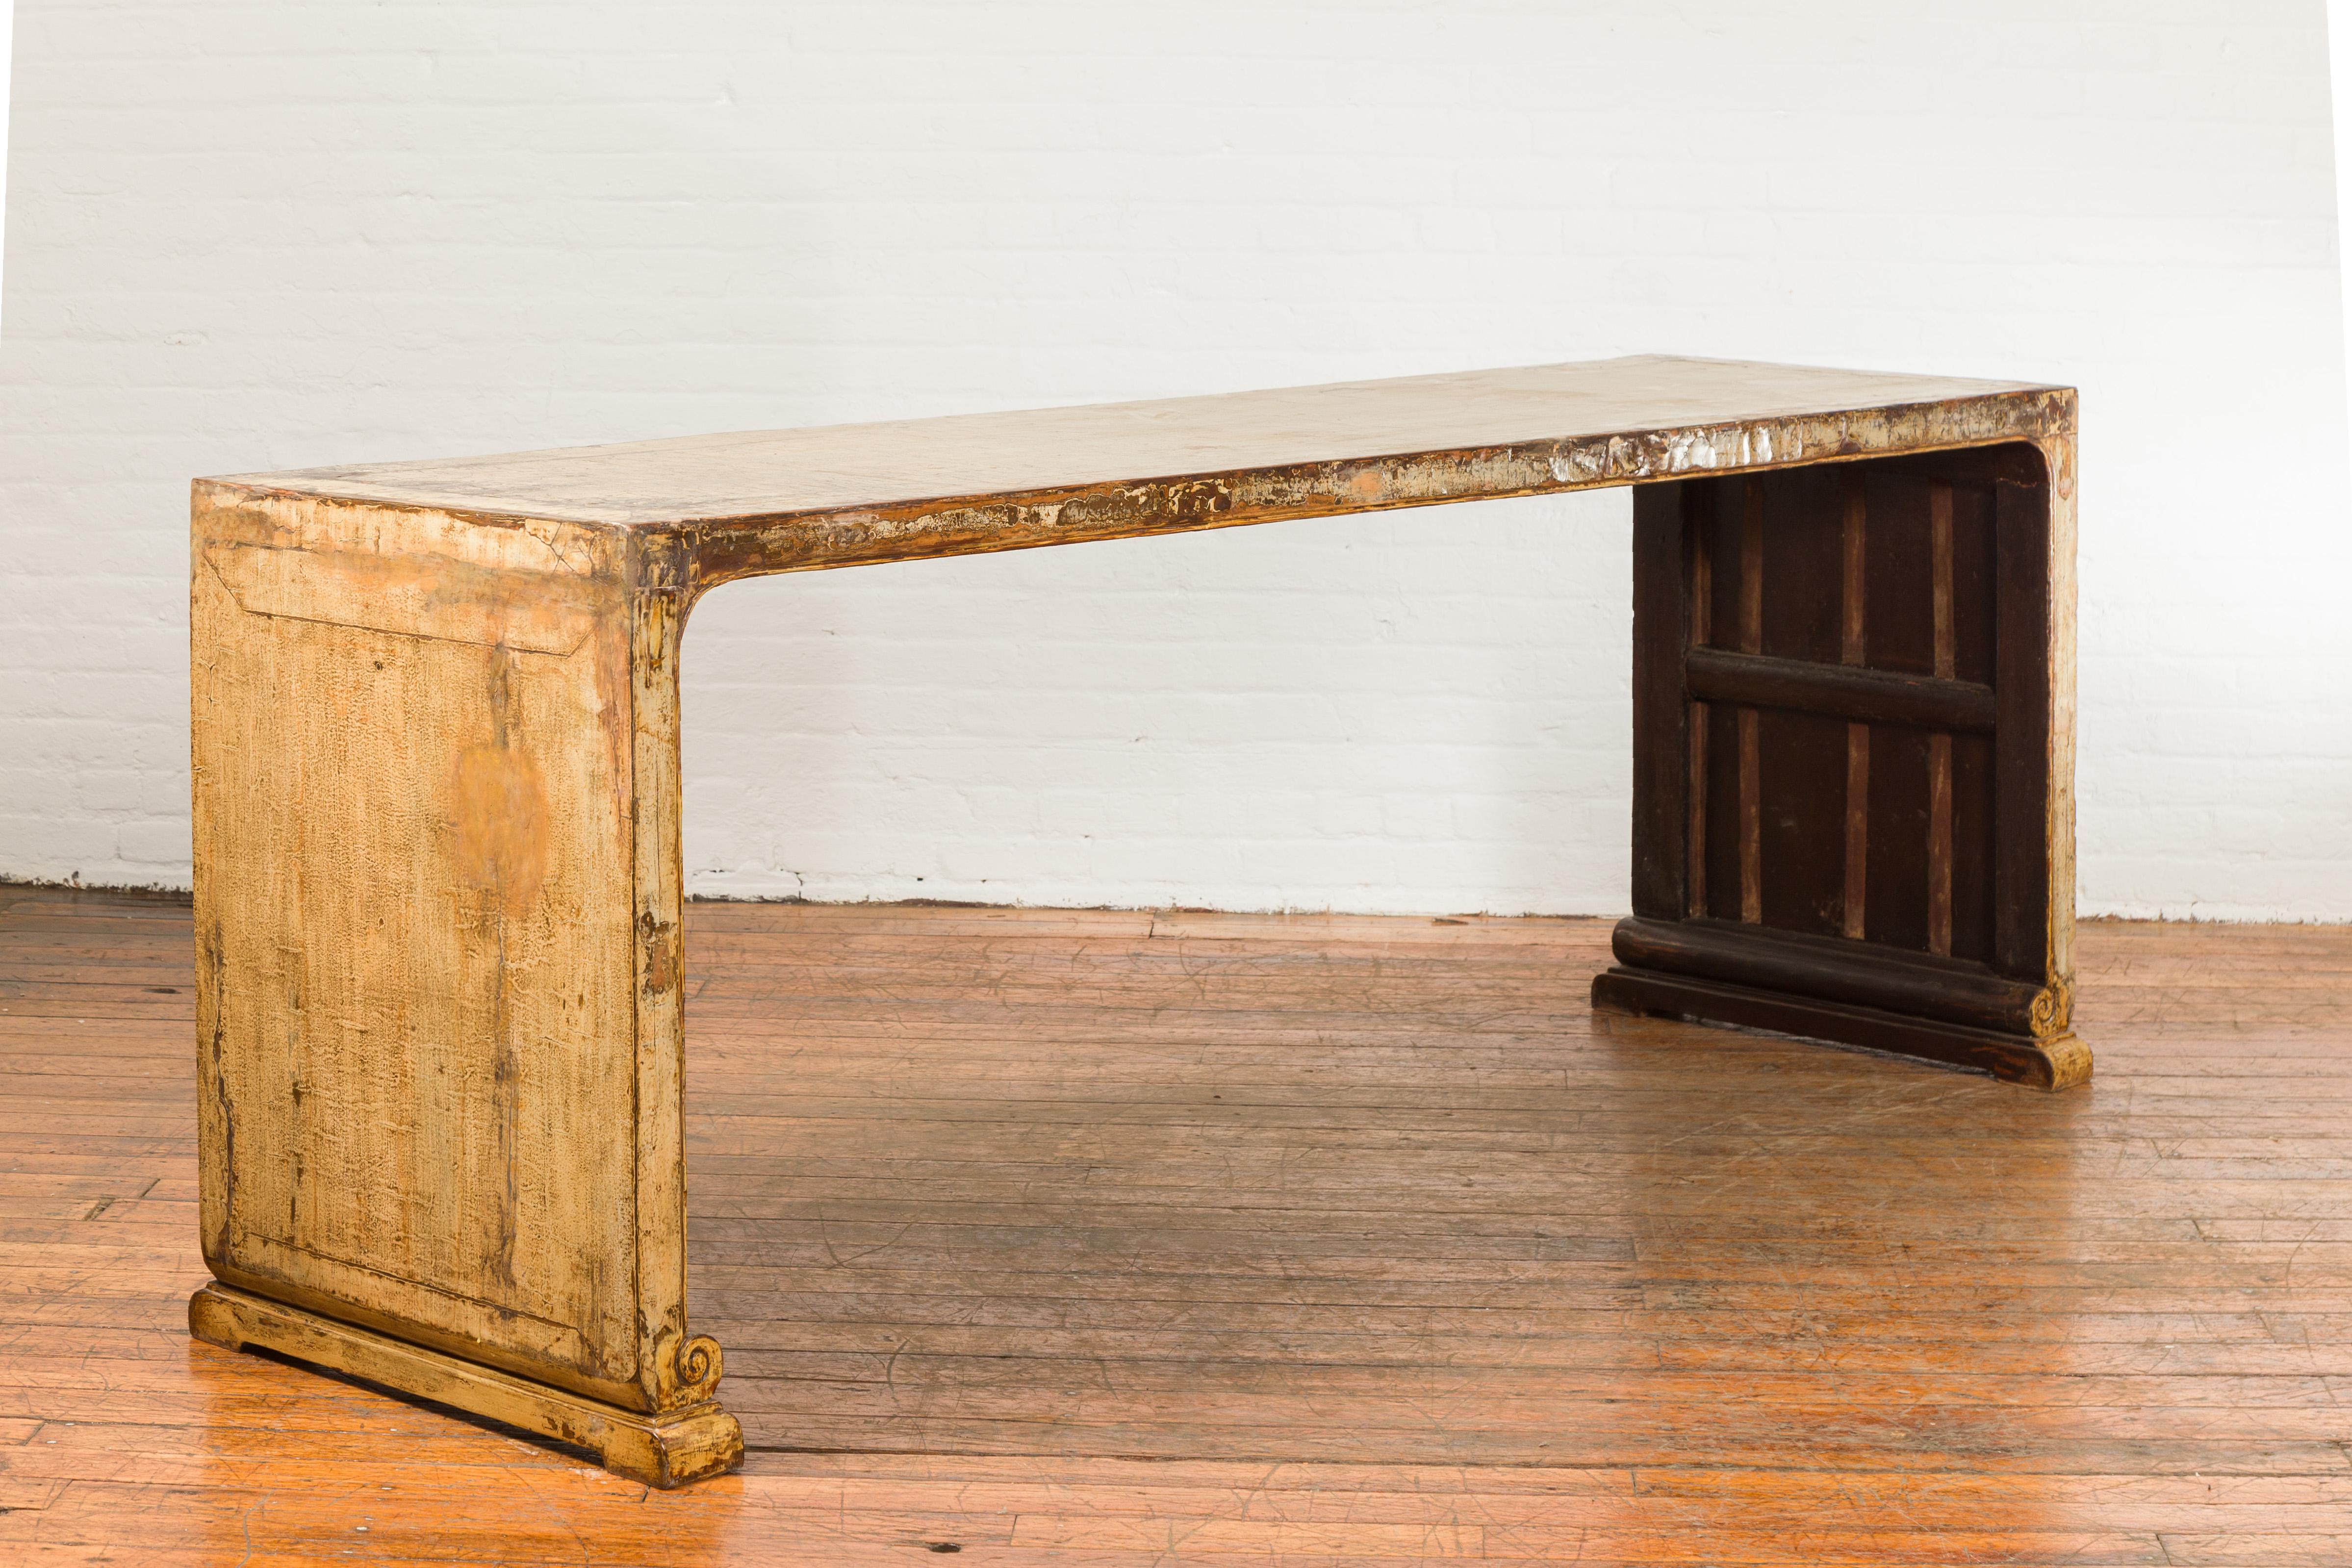 An oversized Chinese vintage altar console table from the mid 20th century, with distressed rubbed patina and scrolling extremities. Created in China during the midcentury period, this altar table draws our attention with its great proportions and